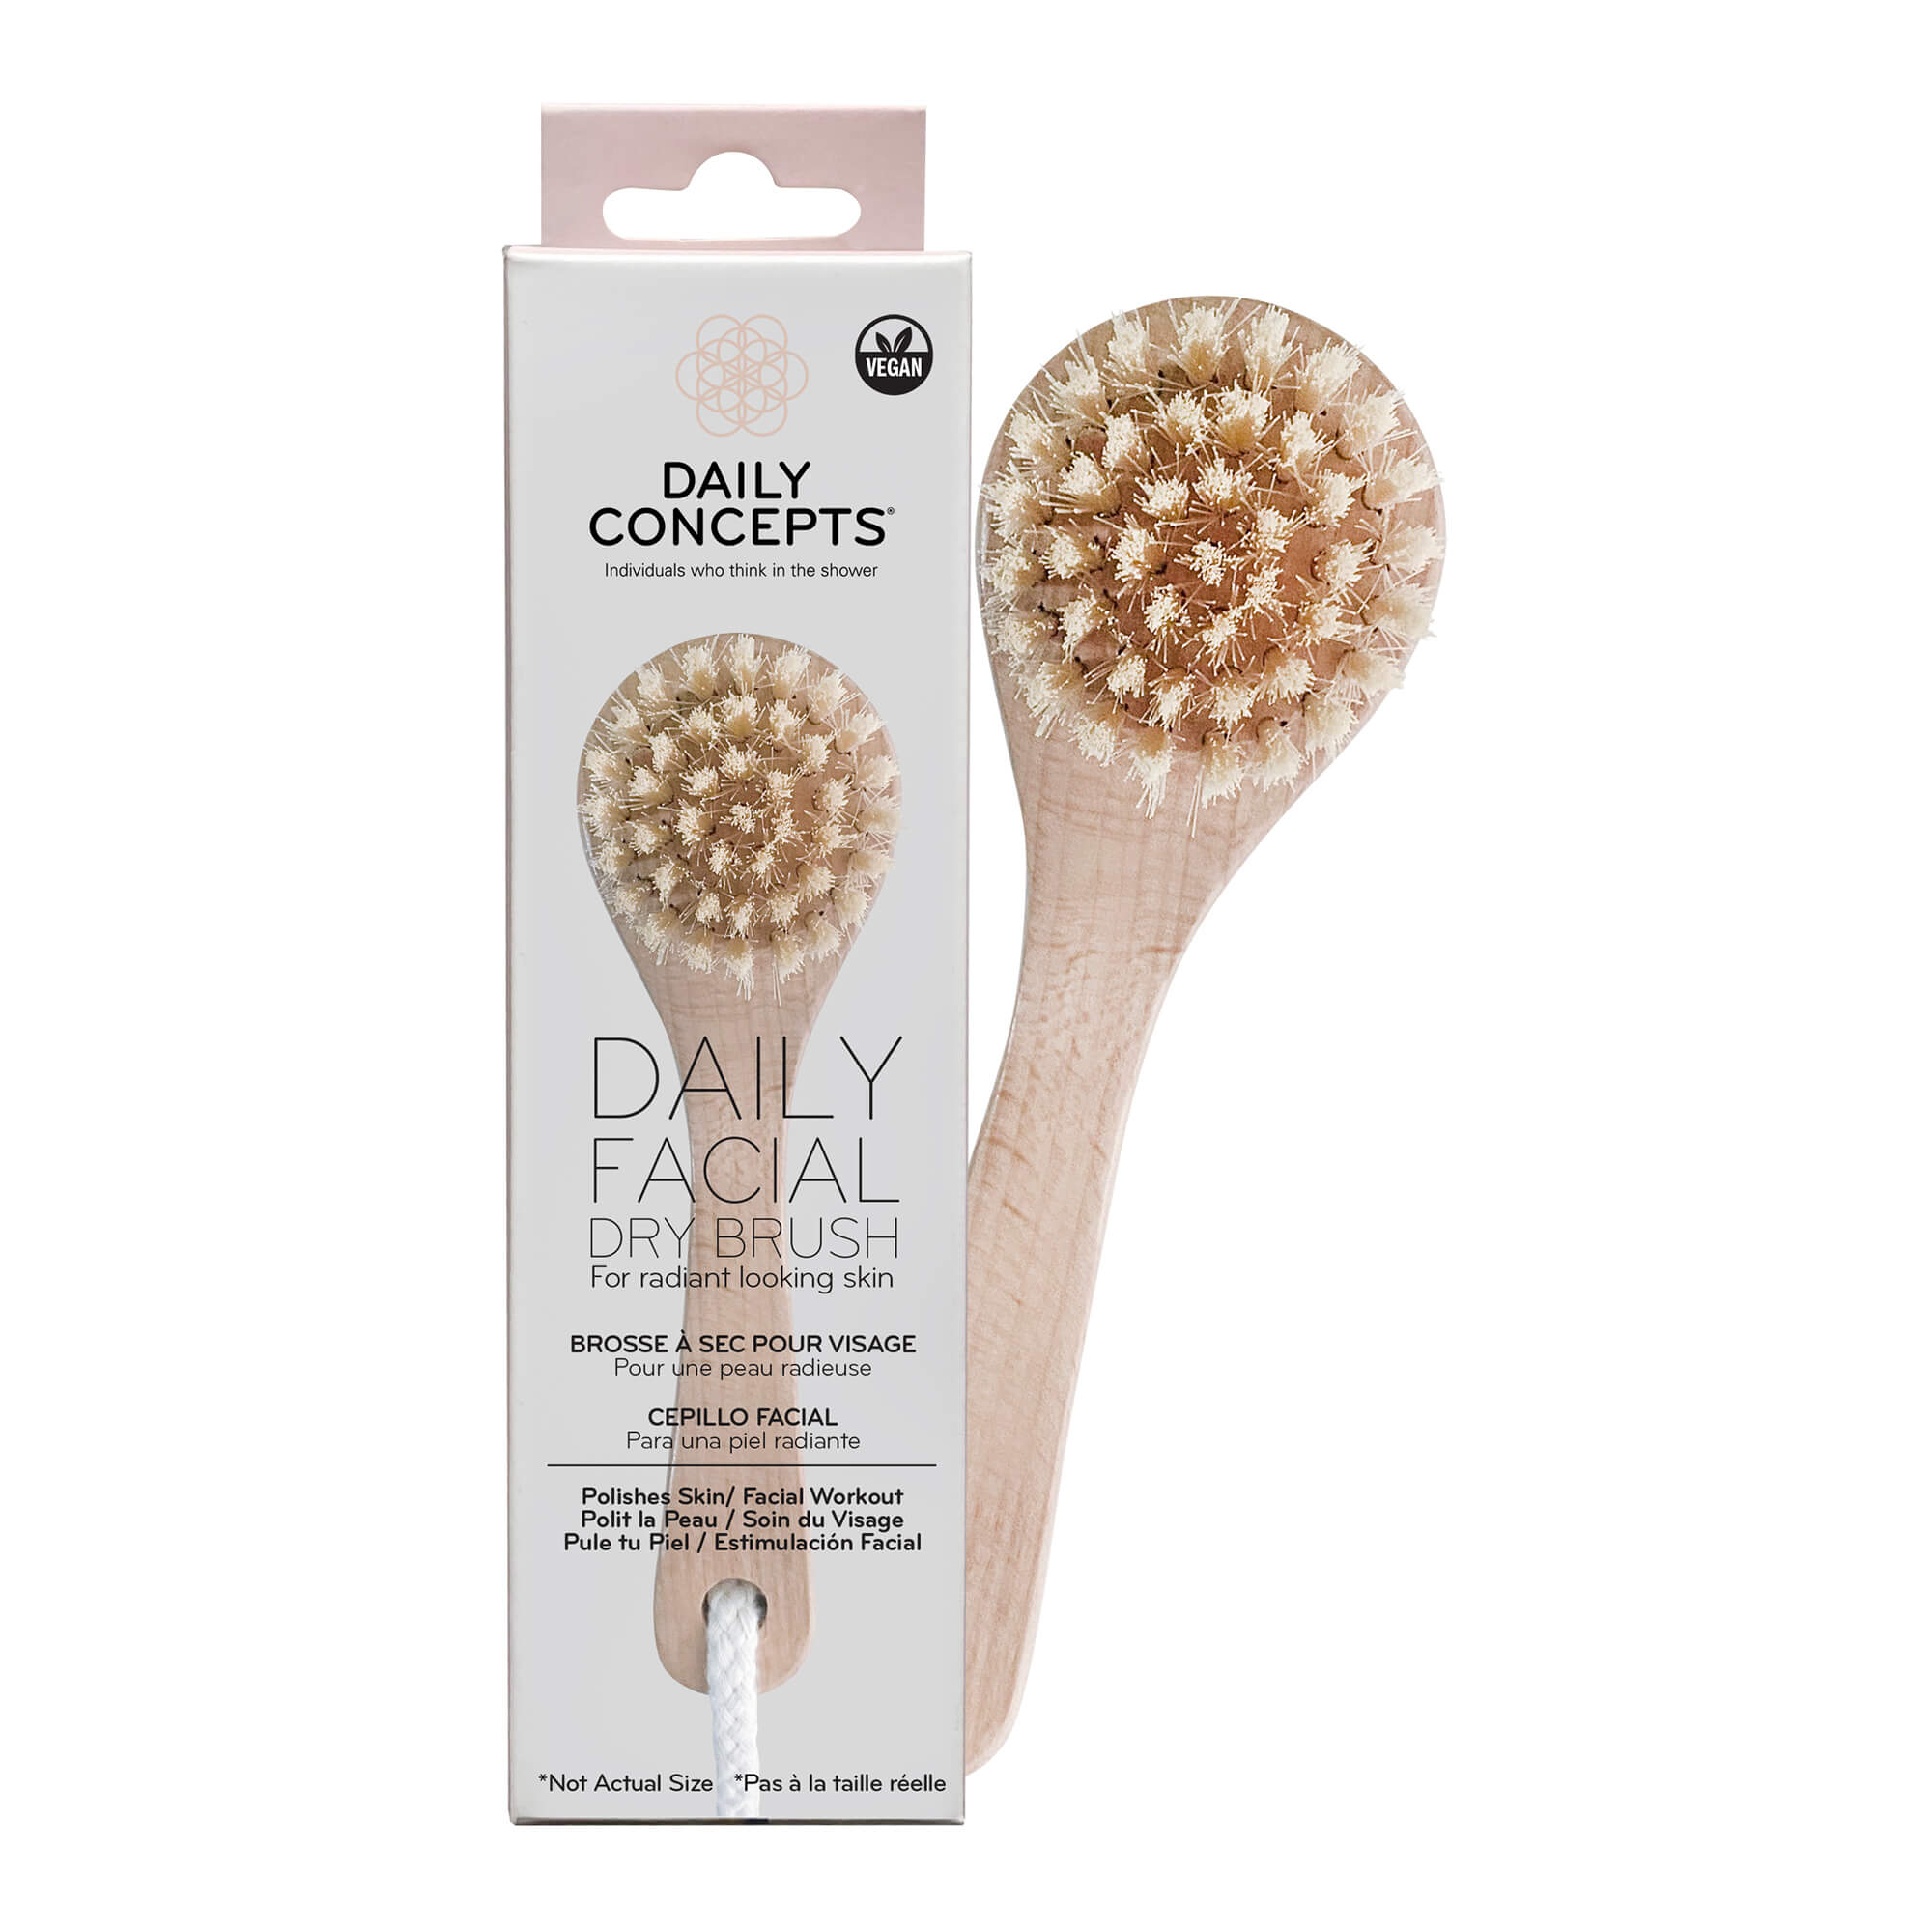 Daily Facial Dry Brush by Daily Concepts - luxury Spa goods – DAILY CONCEPTS